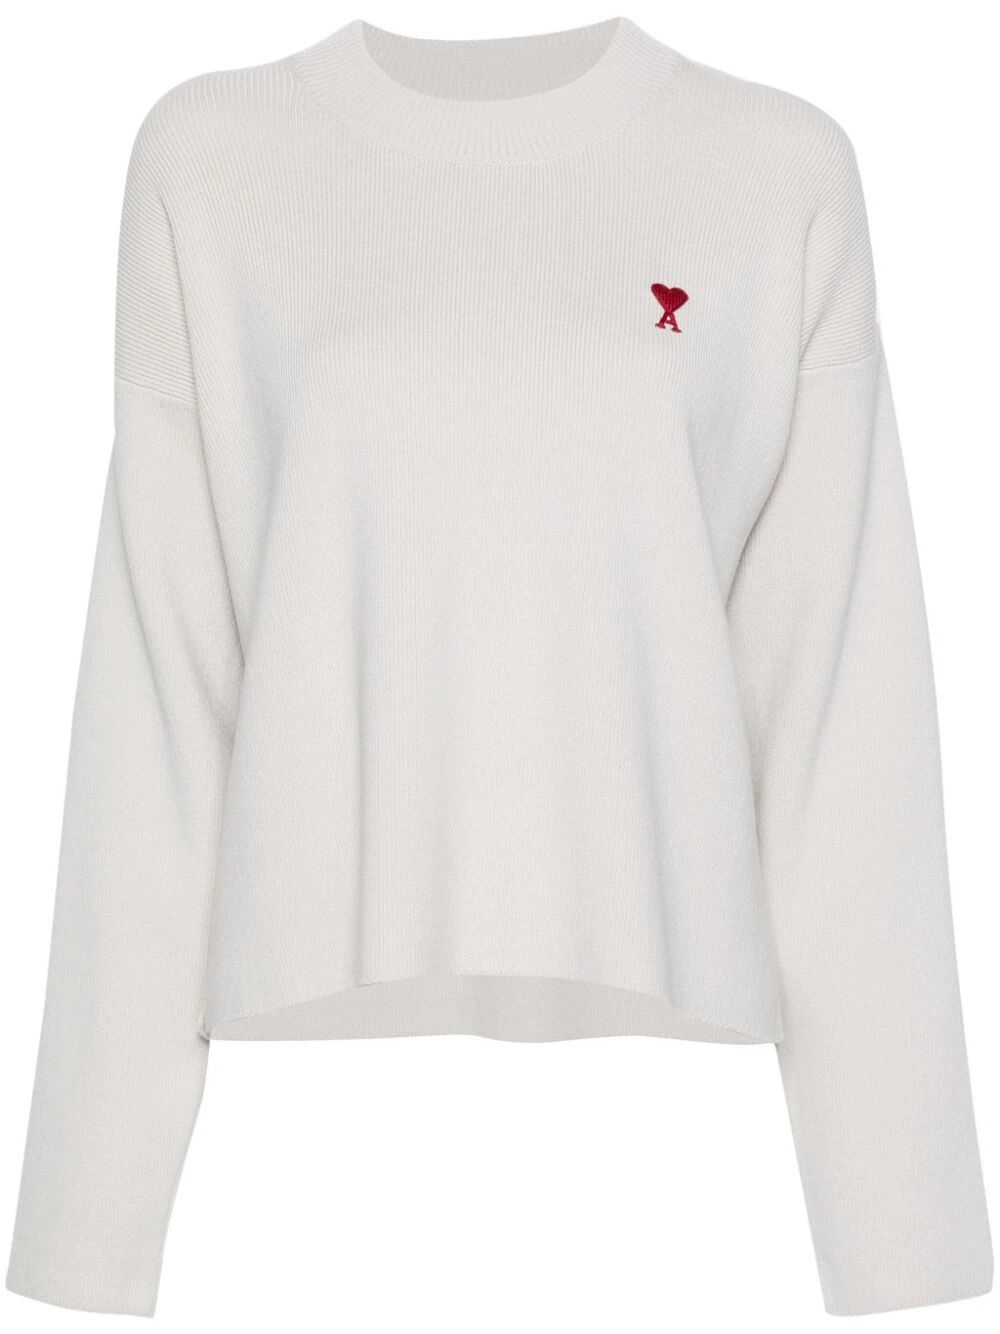 Red Adc Crew Neck Sweater